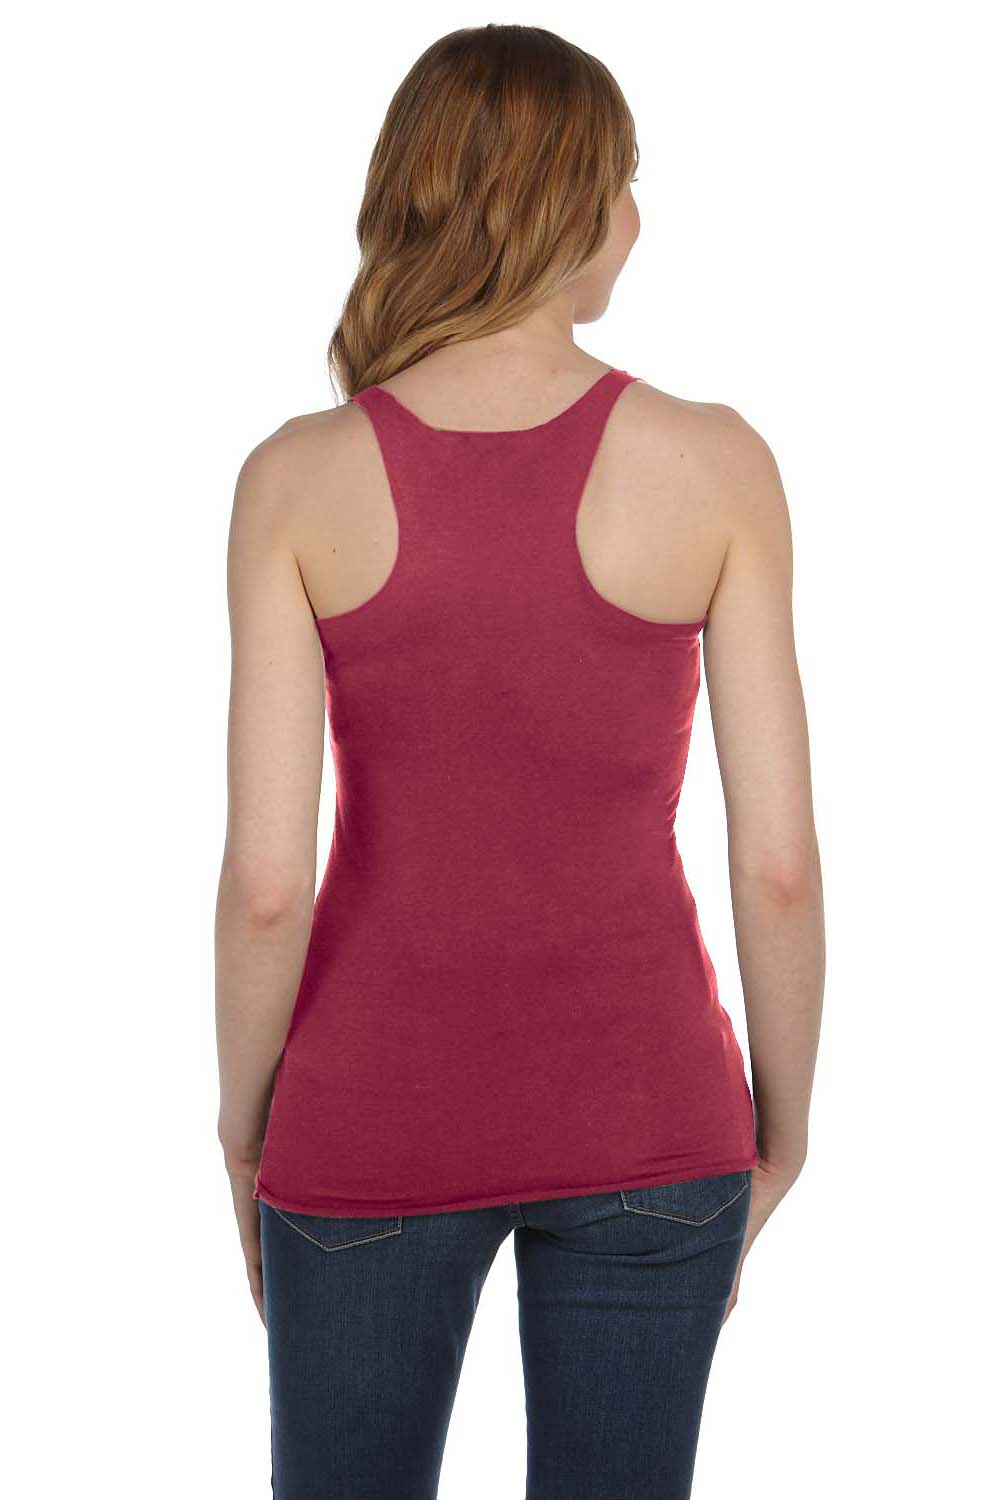 Bella + Canvas 8430 Womens Tank Top Red Back